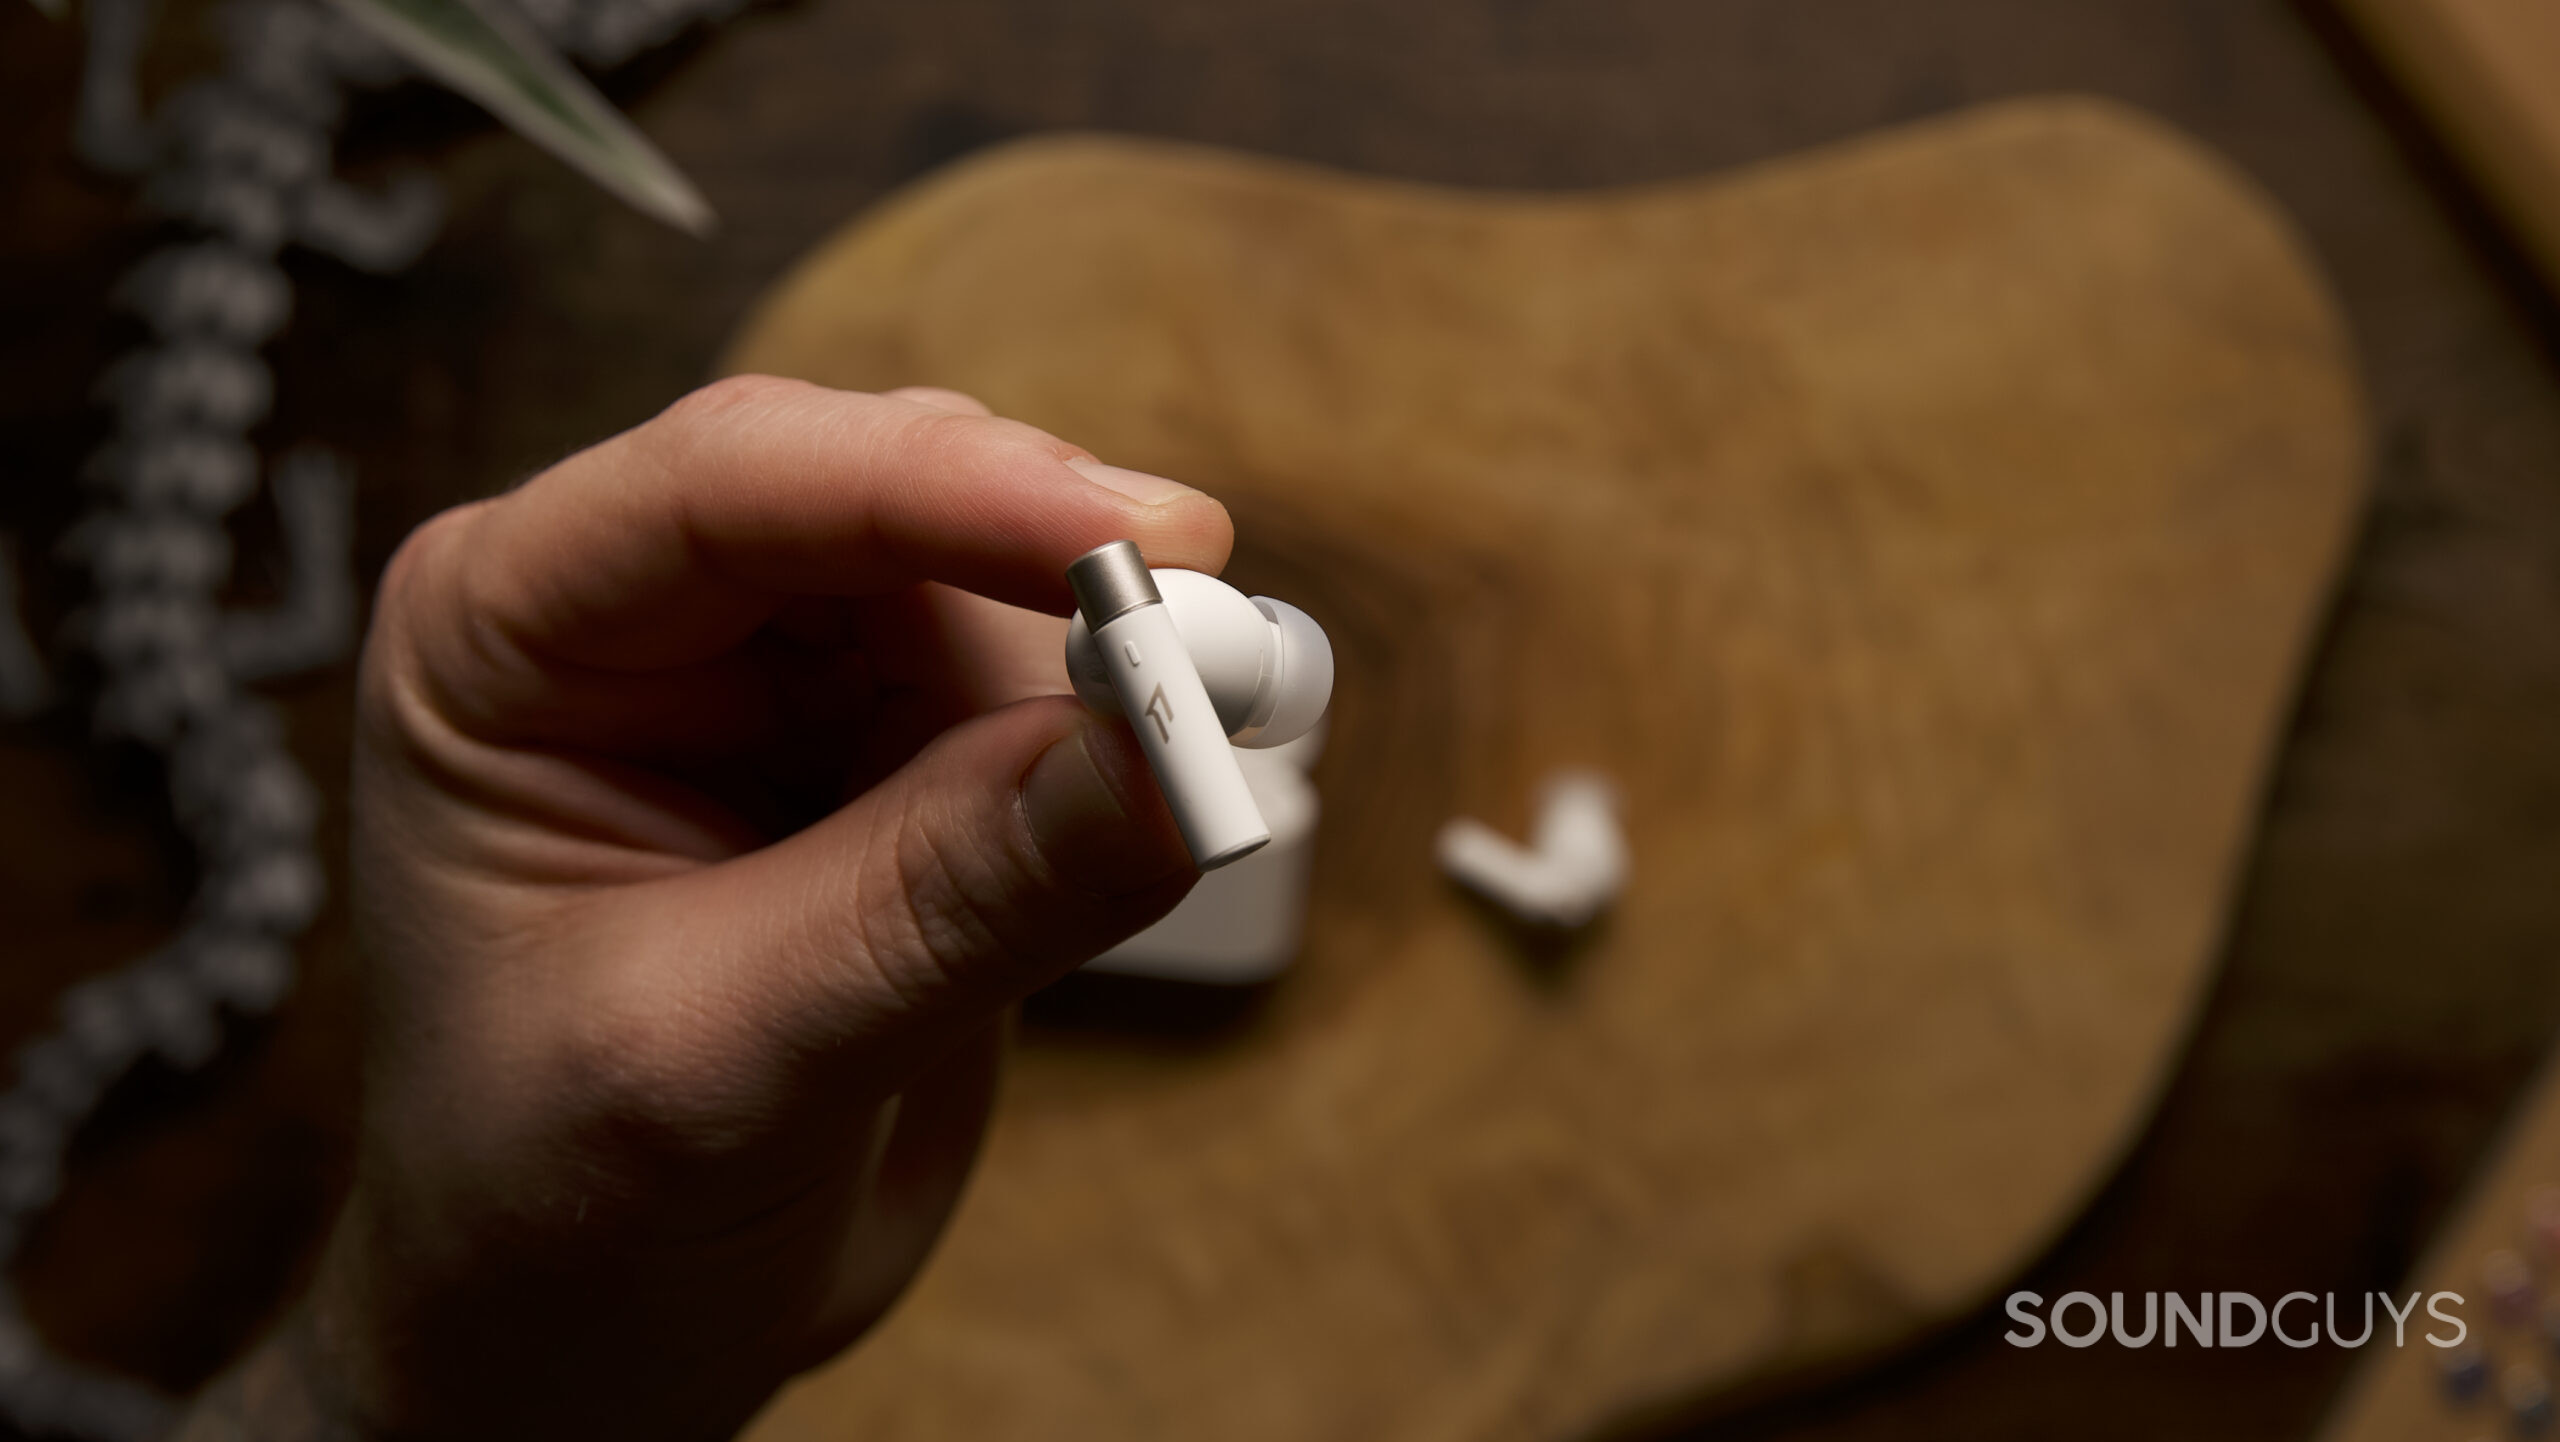 Top view of a single PistonBuds PRO Q30 earbud.